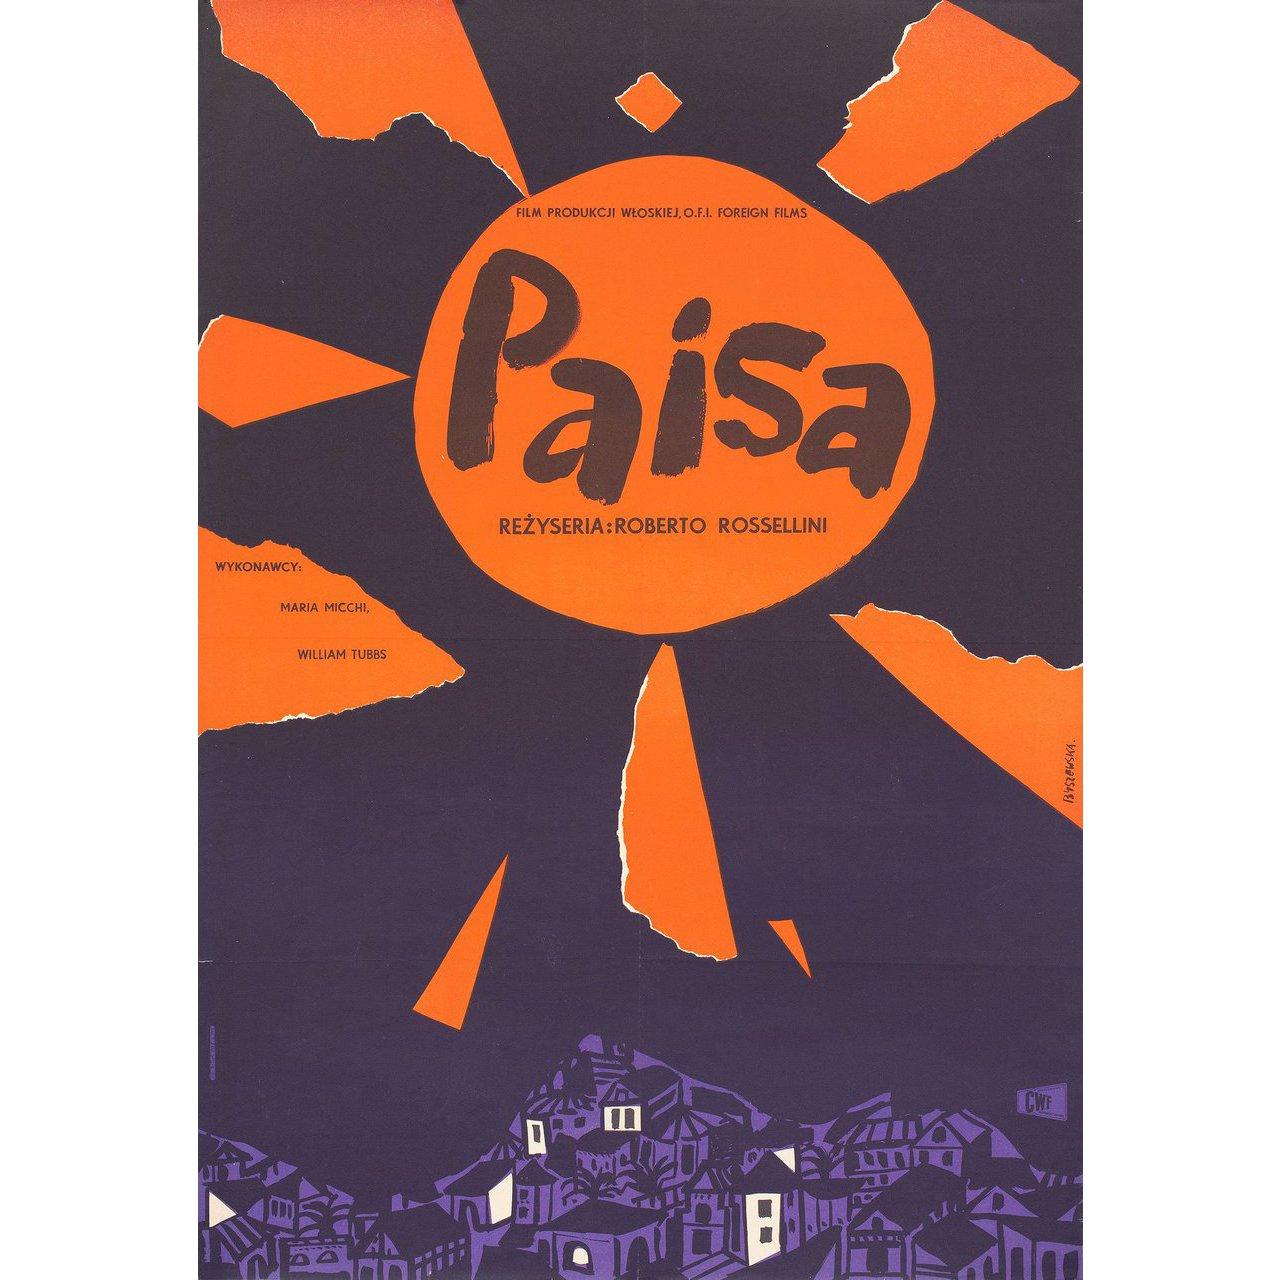 Original 1957 Polish A1 poster by Teresa Byszewska for the 1946 film Paisan (Paisa) directed by Roberto Rossellini with Carmela Sazio / Robert Van Loon / Benjamin Emanuel / Raymond Campbell. Fine condition, folded. Many original posters were issued